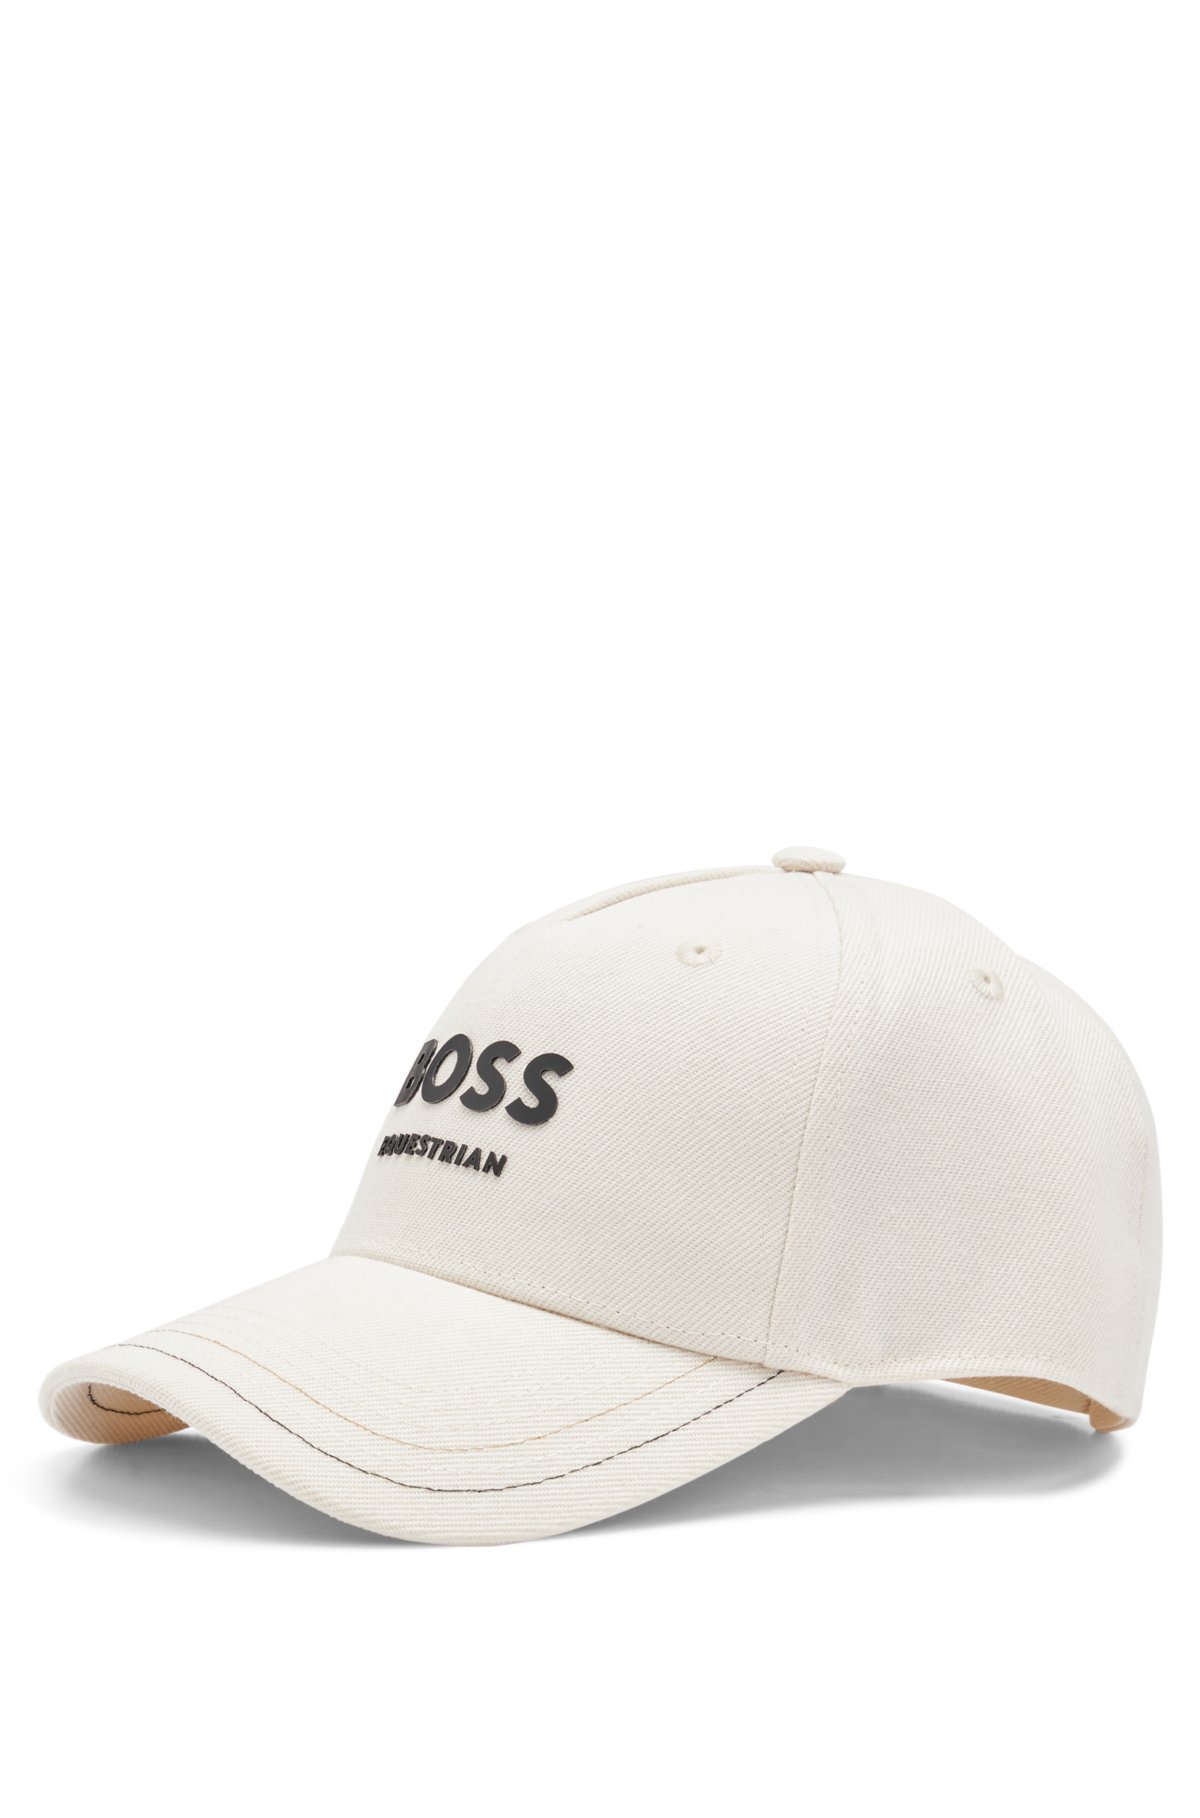 details five-panel Equestrian logo cap - BOSS with